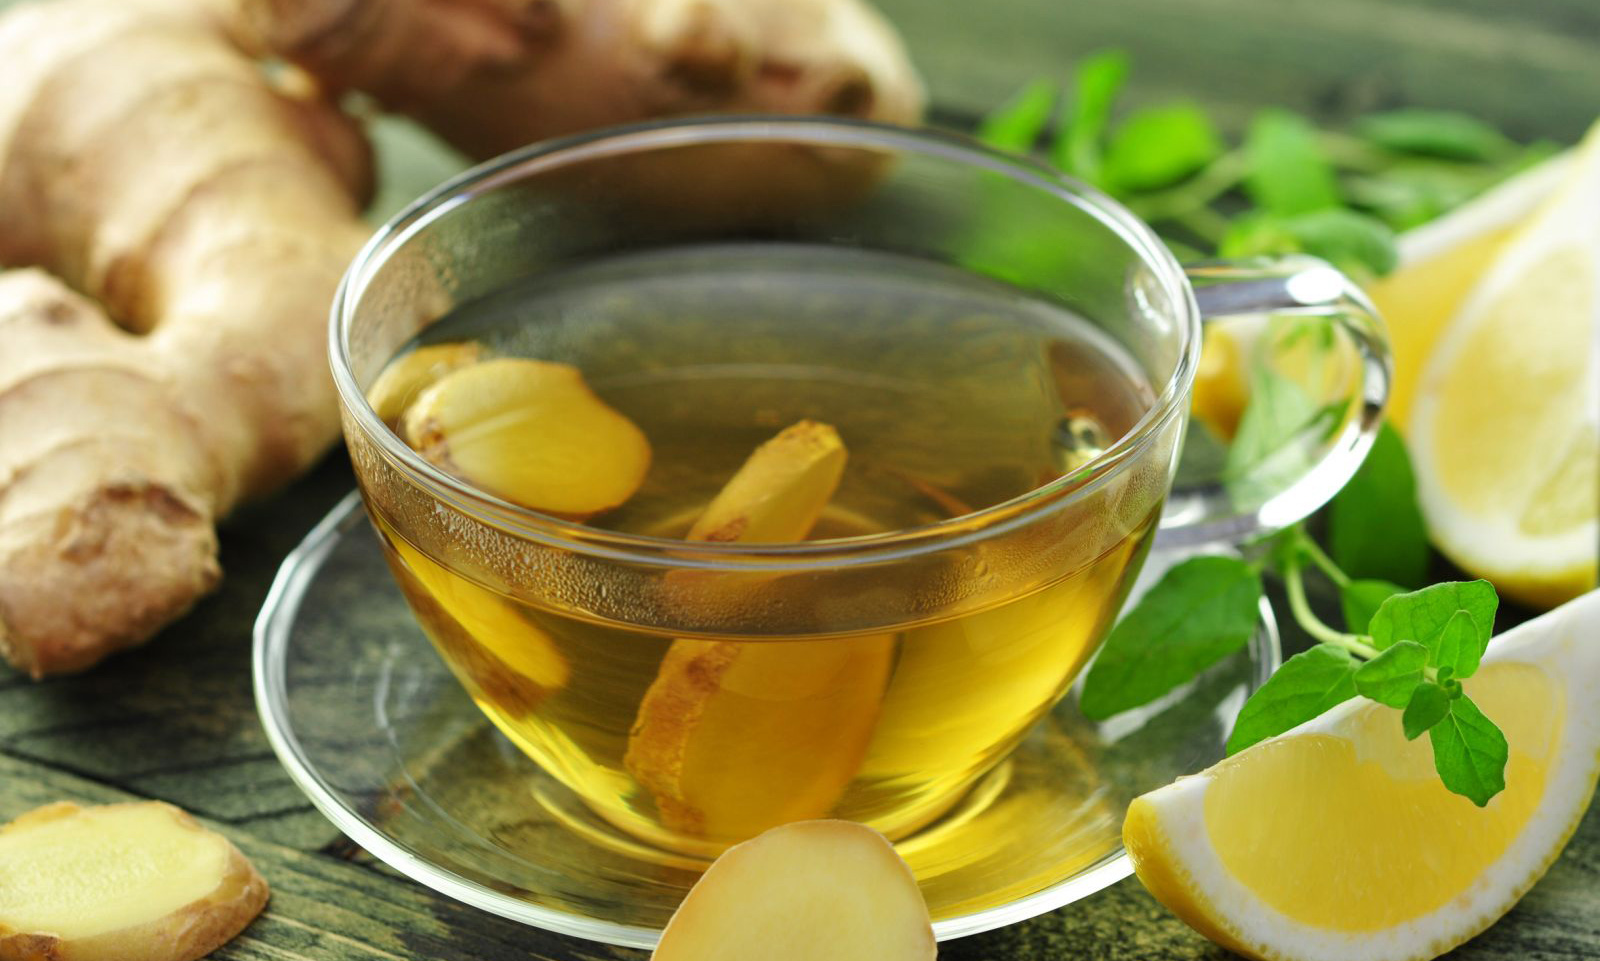 Ginger tea helps relieve cough, effectively cure hoarseness